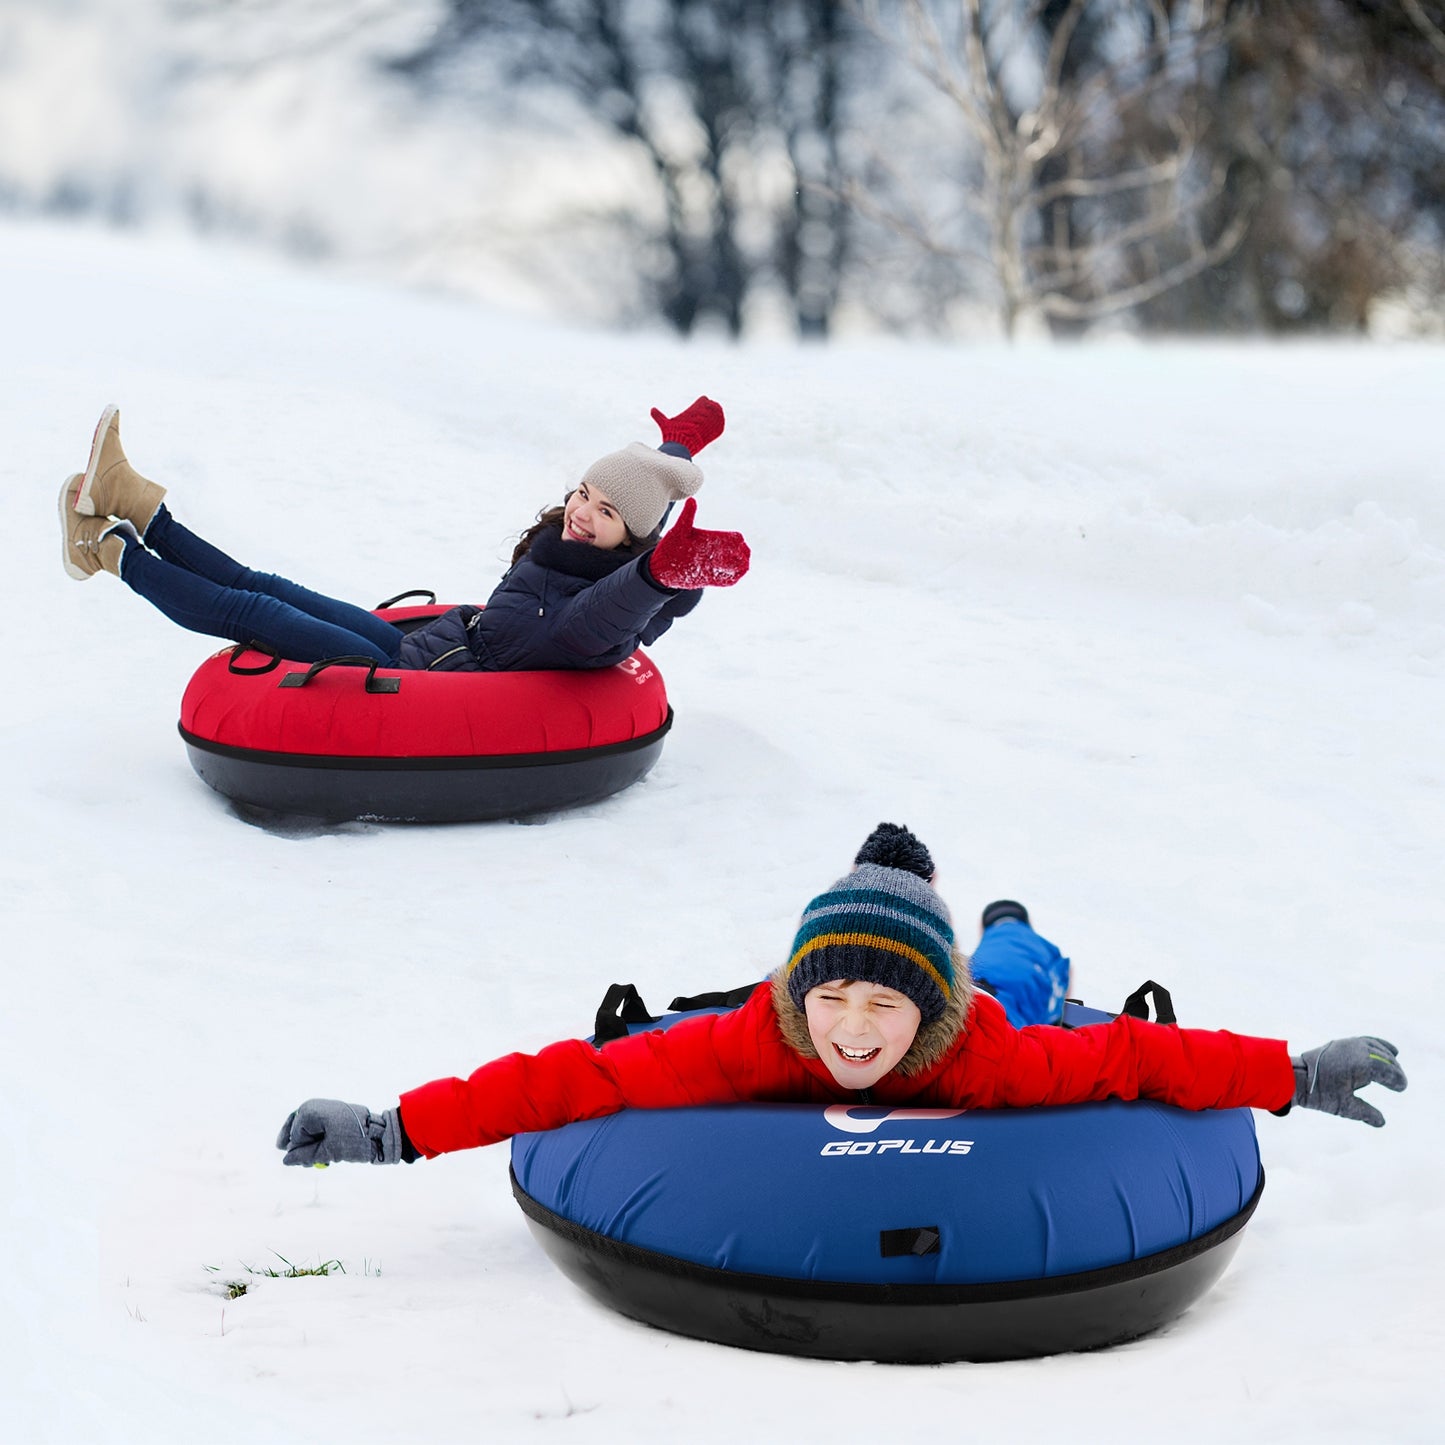 40" Inflatable Snow Sled for Kids and Adults-Blue